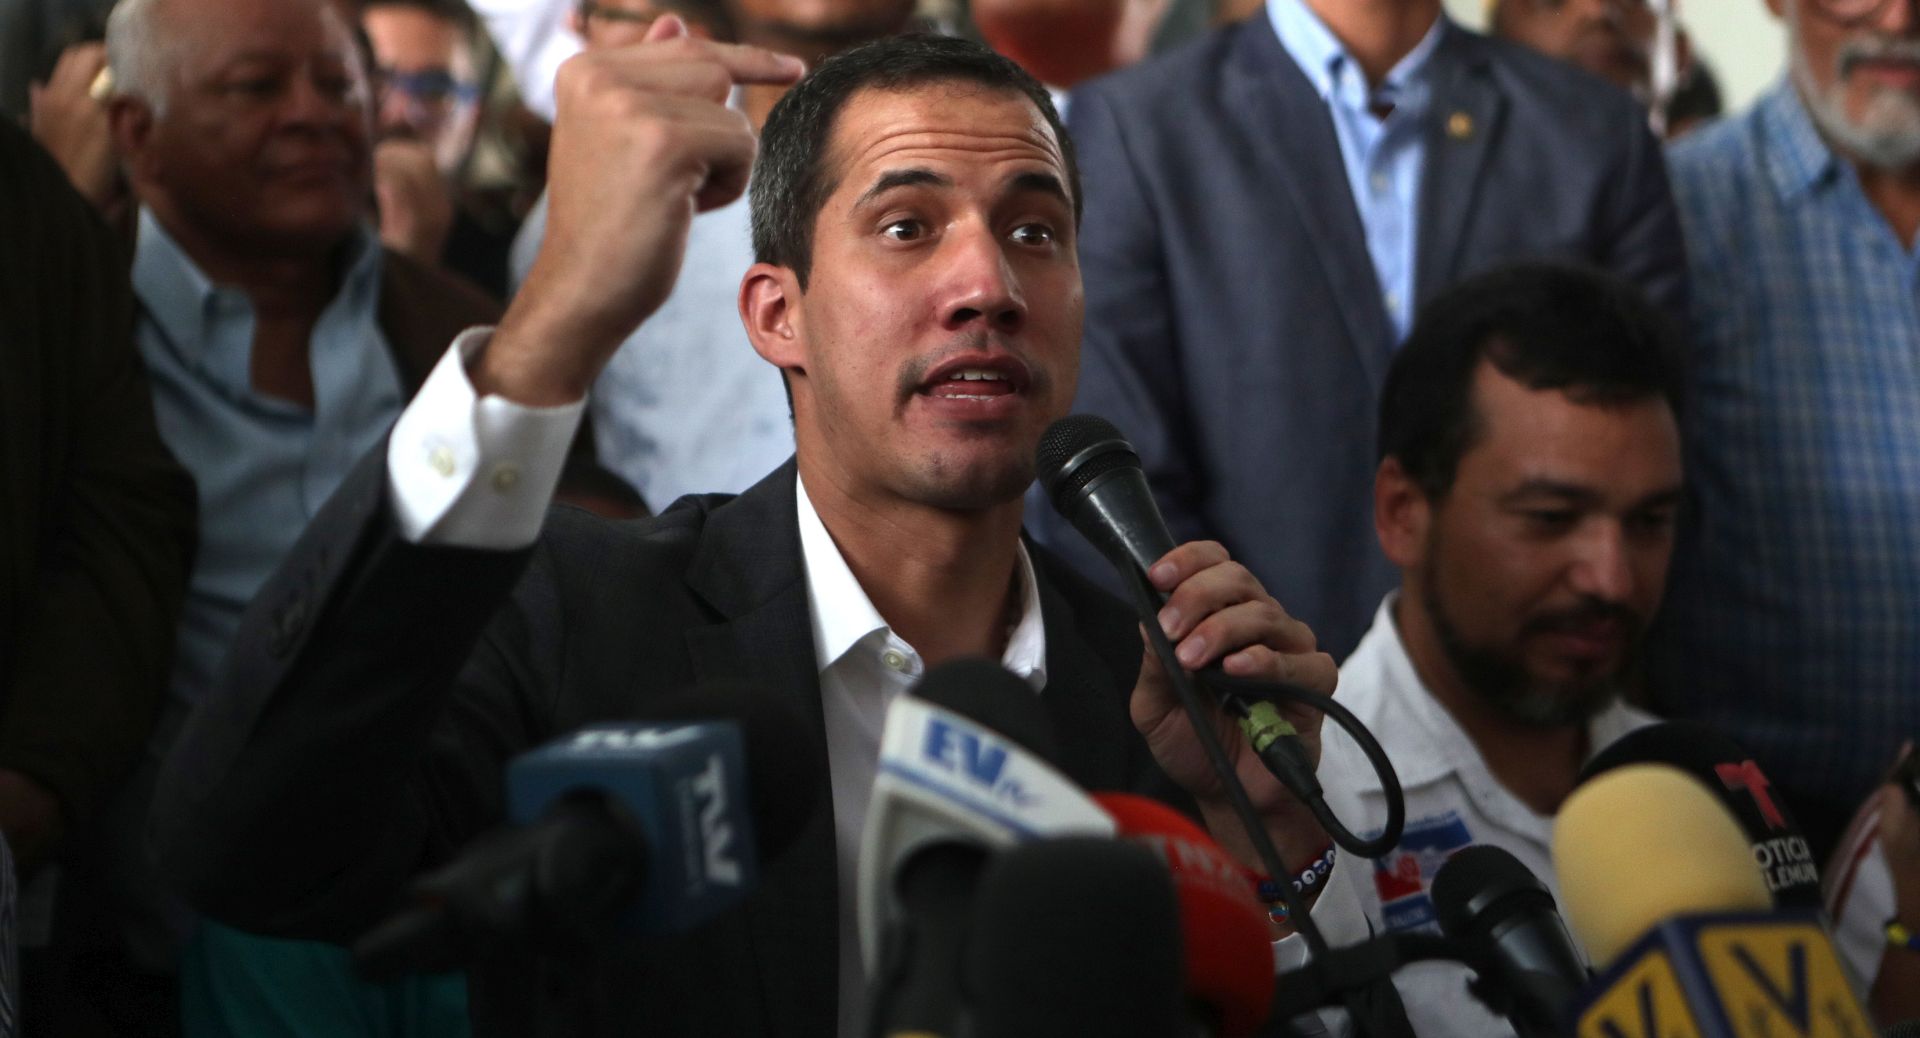 epa07415819 Venezuelan opposition leader Juan Guaido takes part in a press conference after a meeting with trade unions' representatives and public servants at the Engineers Association of Carcas, Venezuela, 05 March 2019.  EPA/Rayner Pena